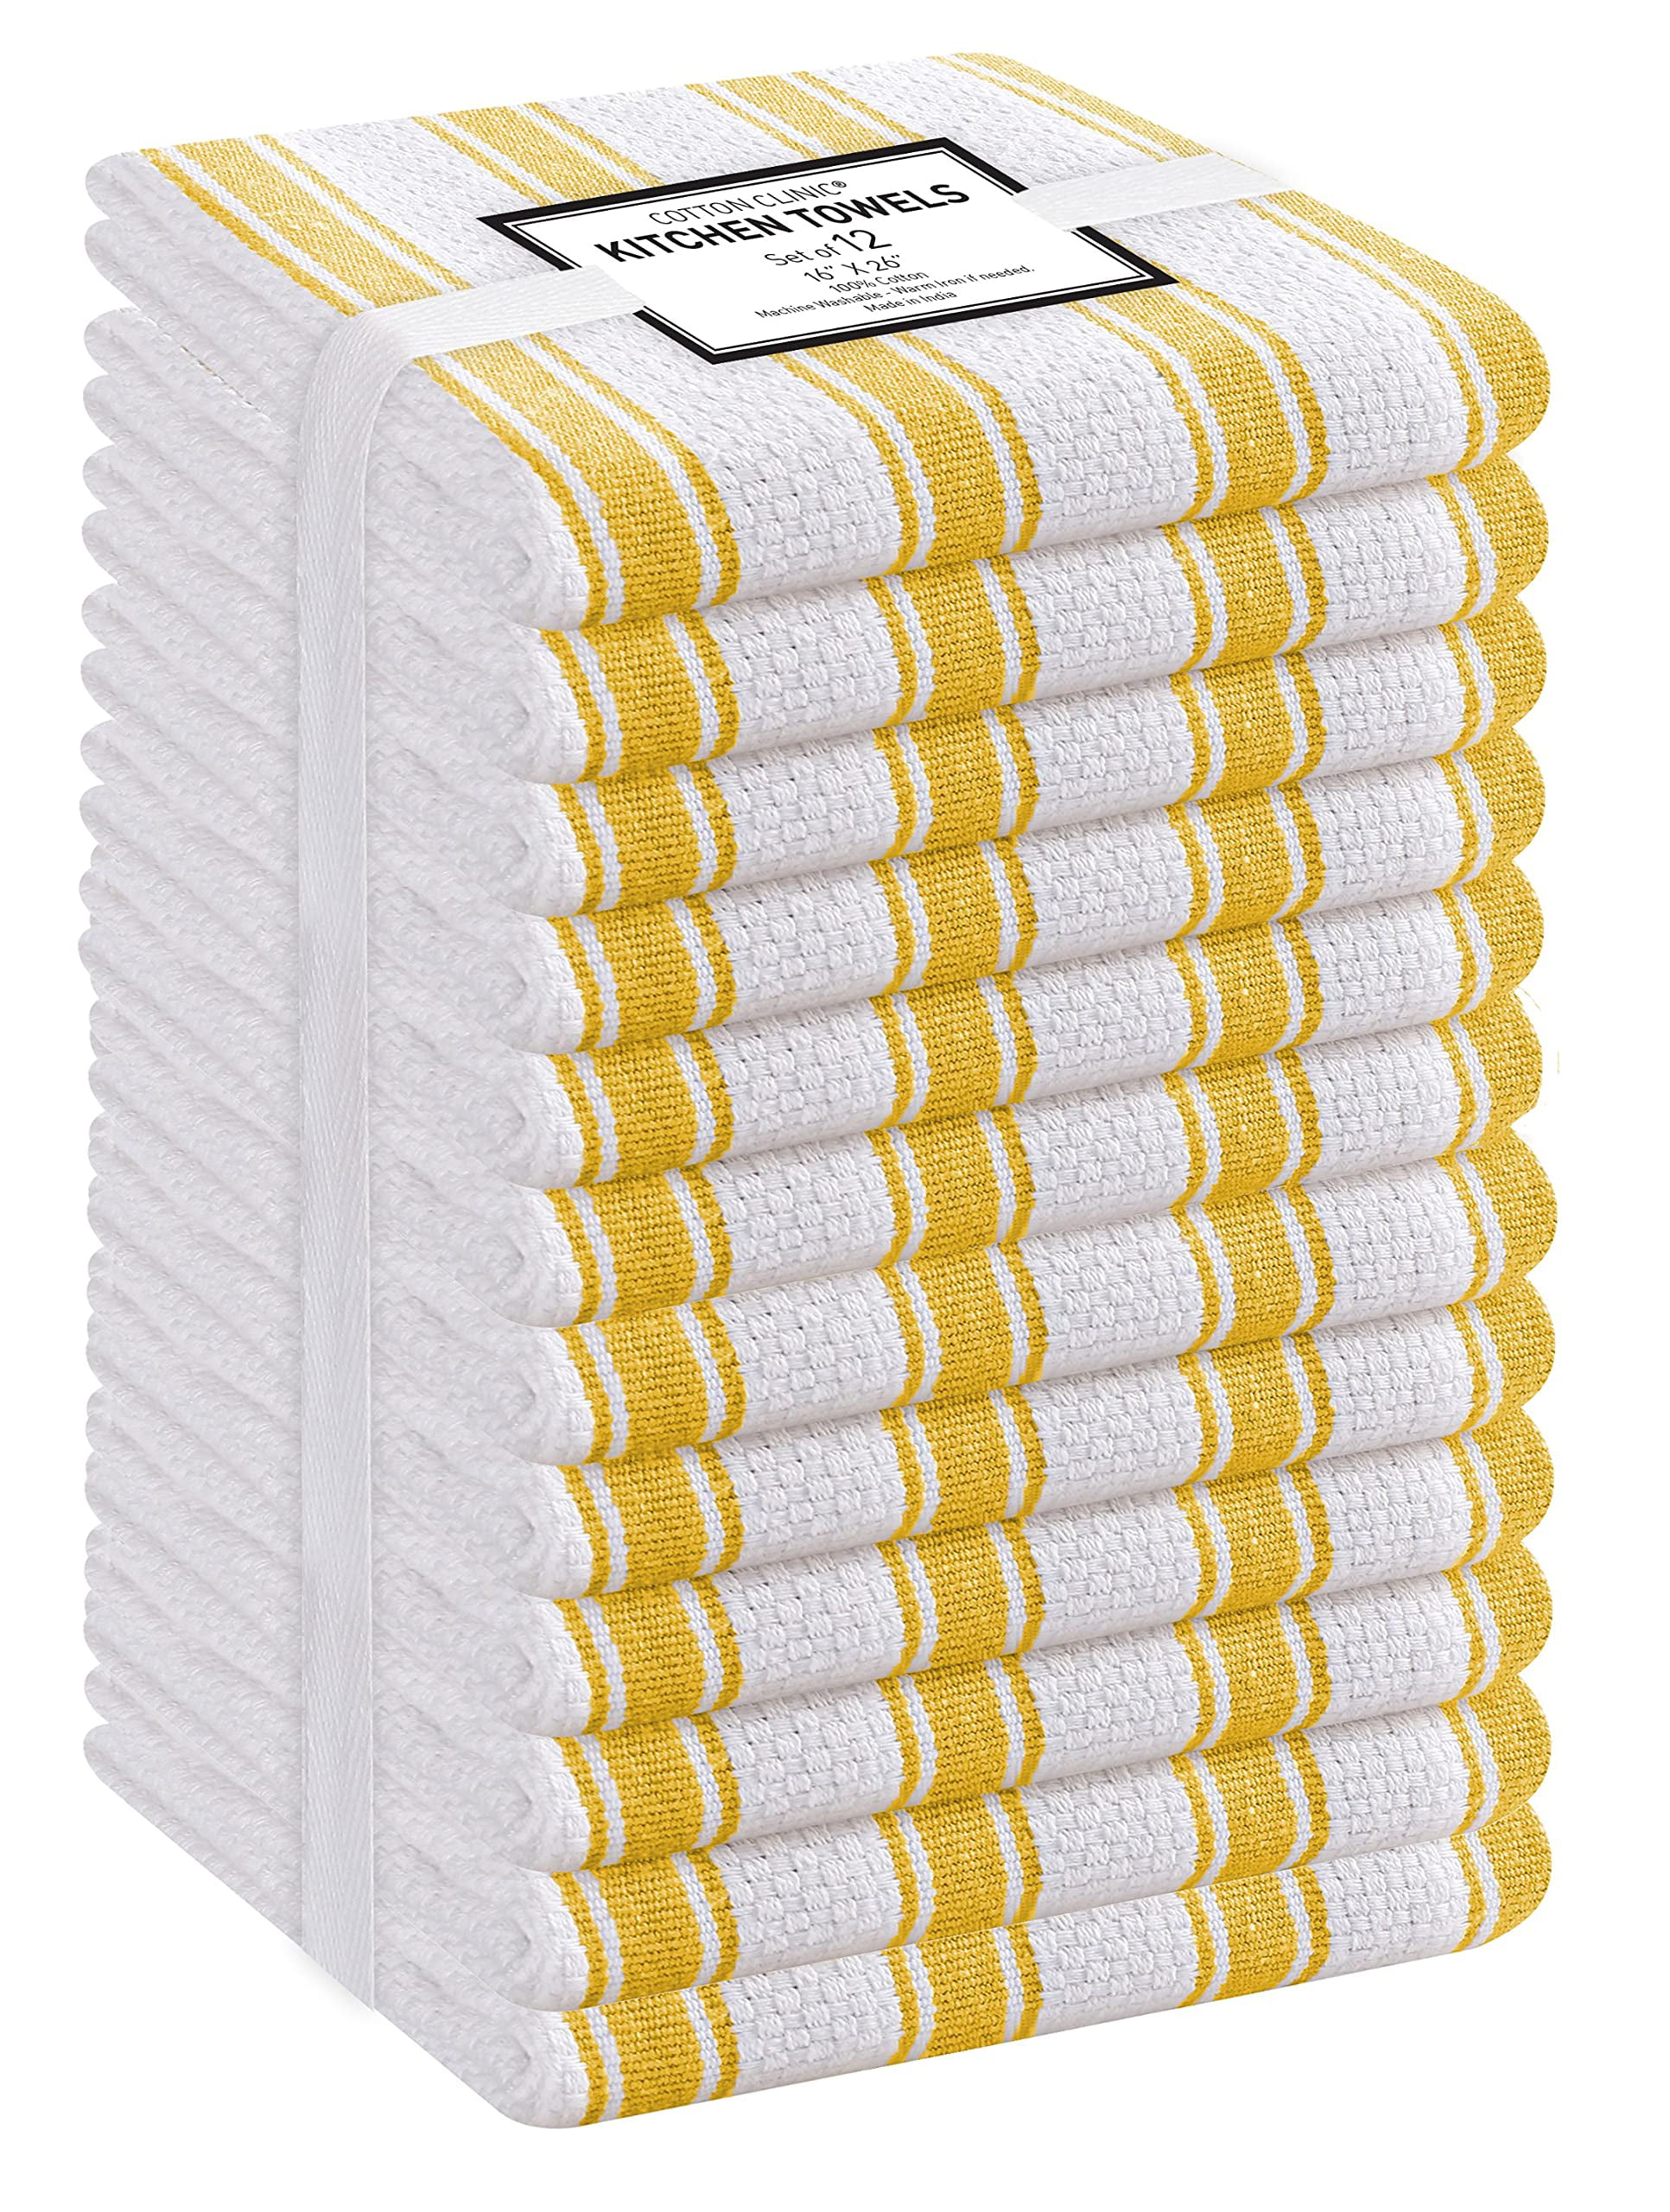 Kitchen Towels | Cotton Dish Towels for Drying Dishes| Absorbent Kitchen  Dish Towels, Dishcloths| Tea Towels for Embroidery|16x26 Stripe Yellow